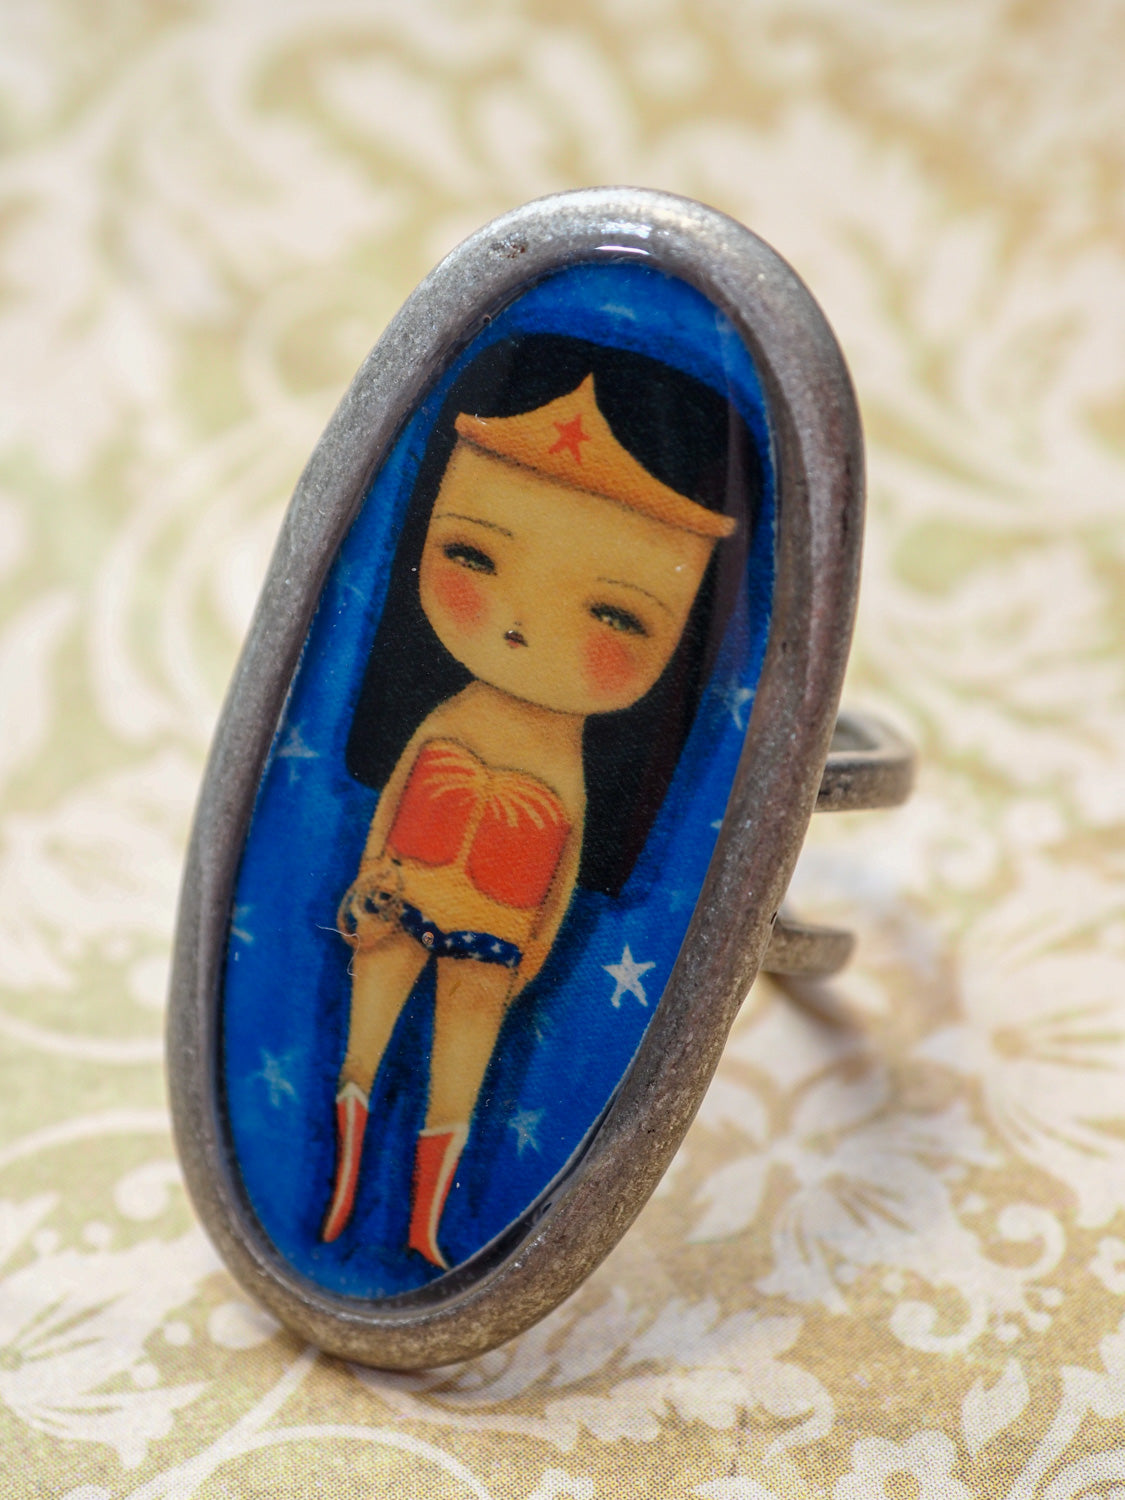 Wonder Woman empowers you with this amazing handmade ring made by Danita Art. It's the perfect accessory for any outfit for your own unique style.